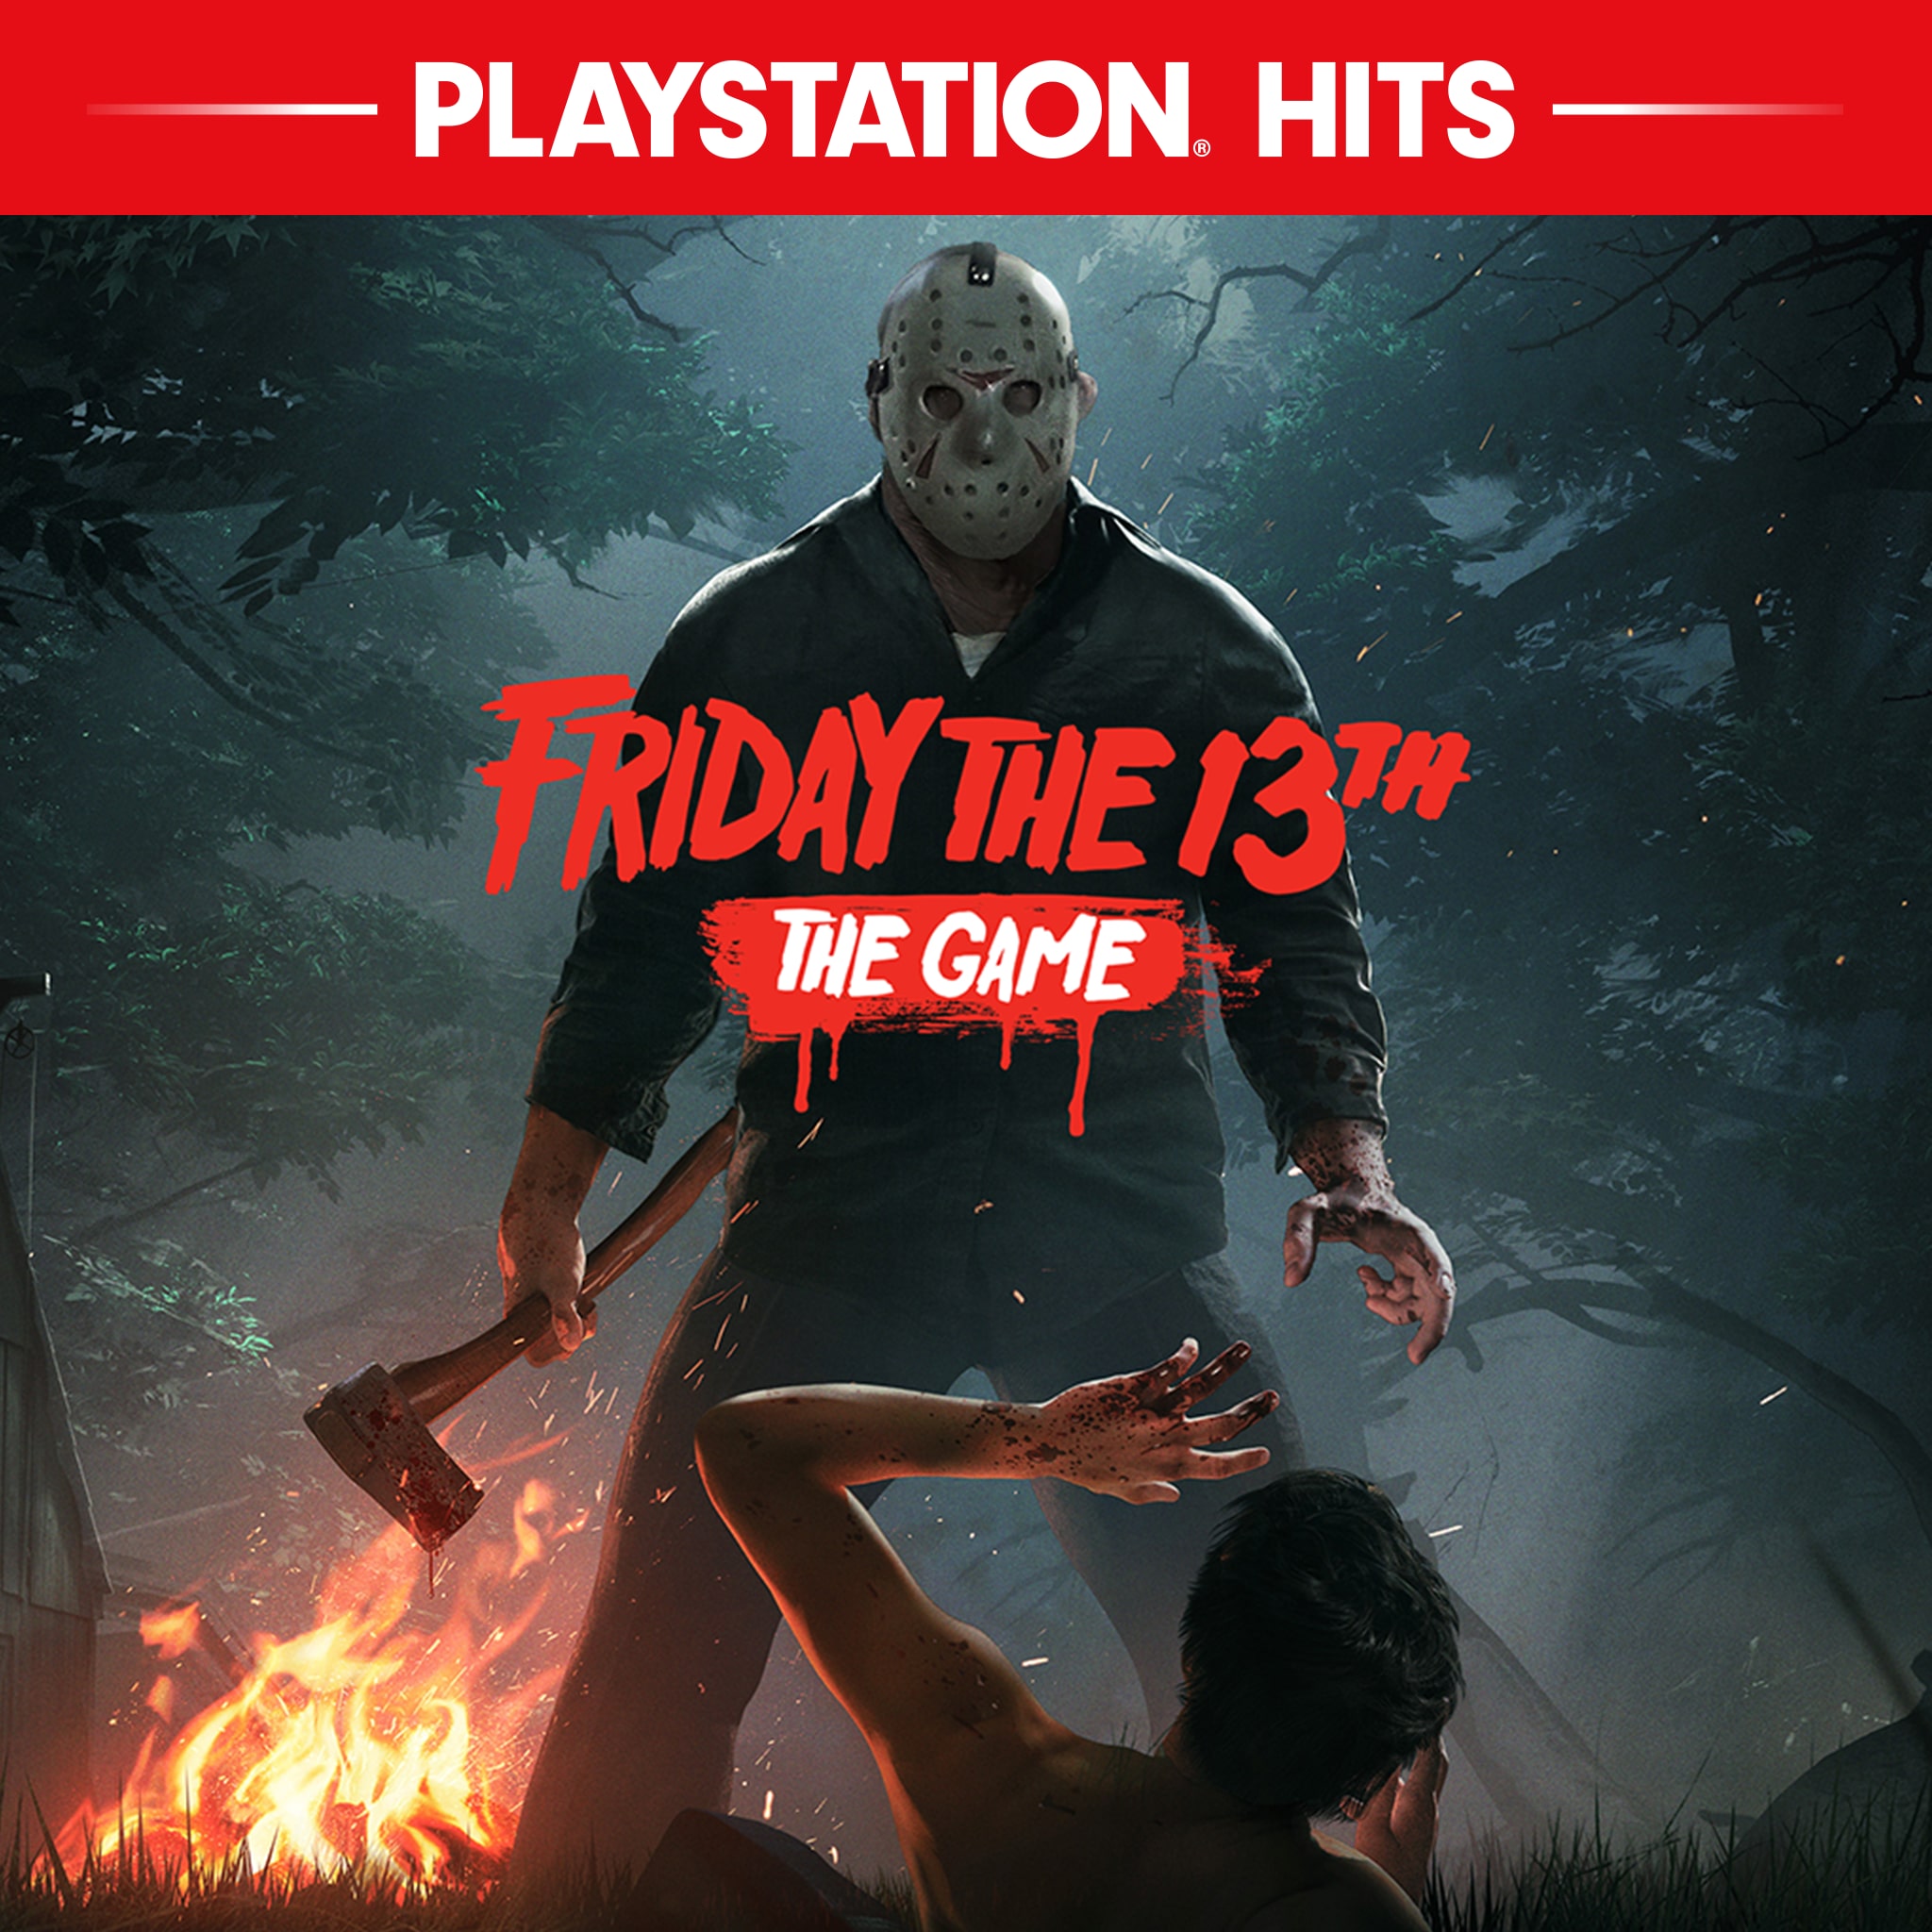 Friday The 13th The Game #tgif #fridaymemes #fridayquotes #fridayimages #funnyquotes #sarcasticquotes #quotes. friday the 13th the game